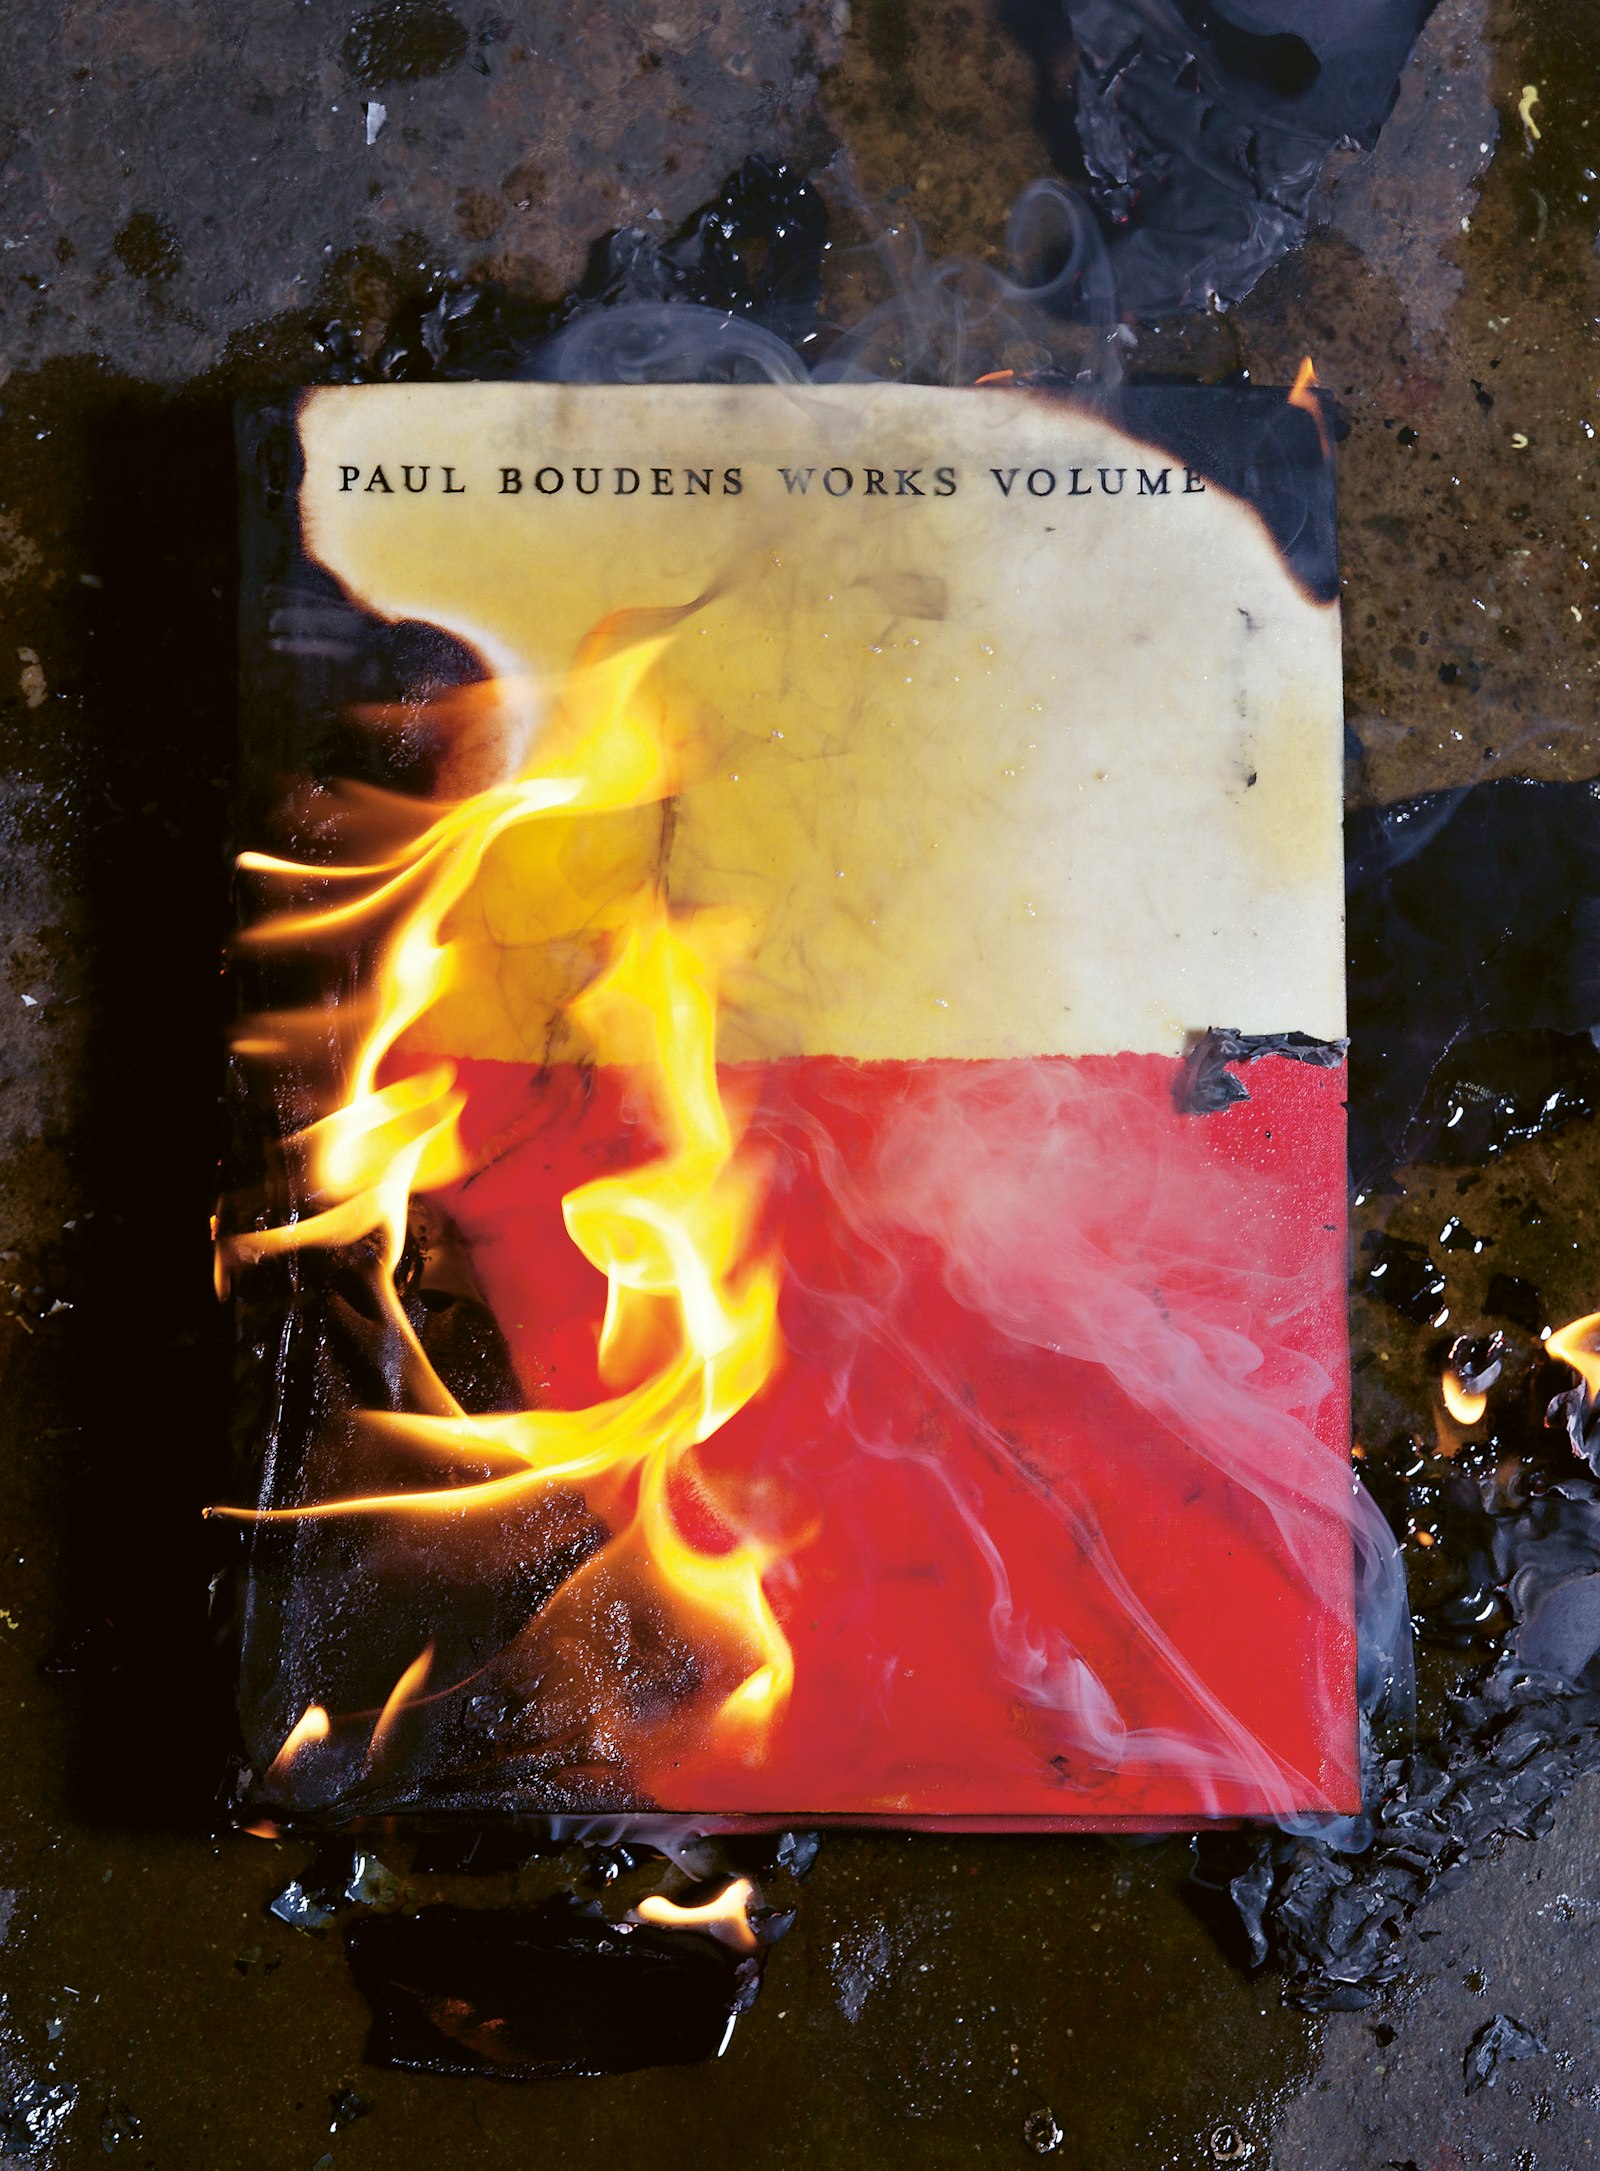 2003 - Monograph Paul Boudens Works Volume I, published by Ludion